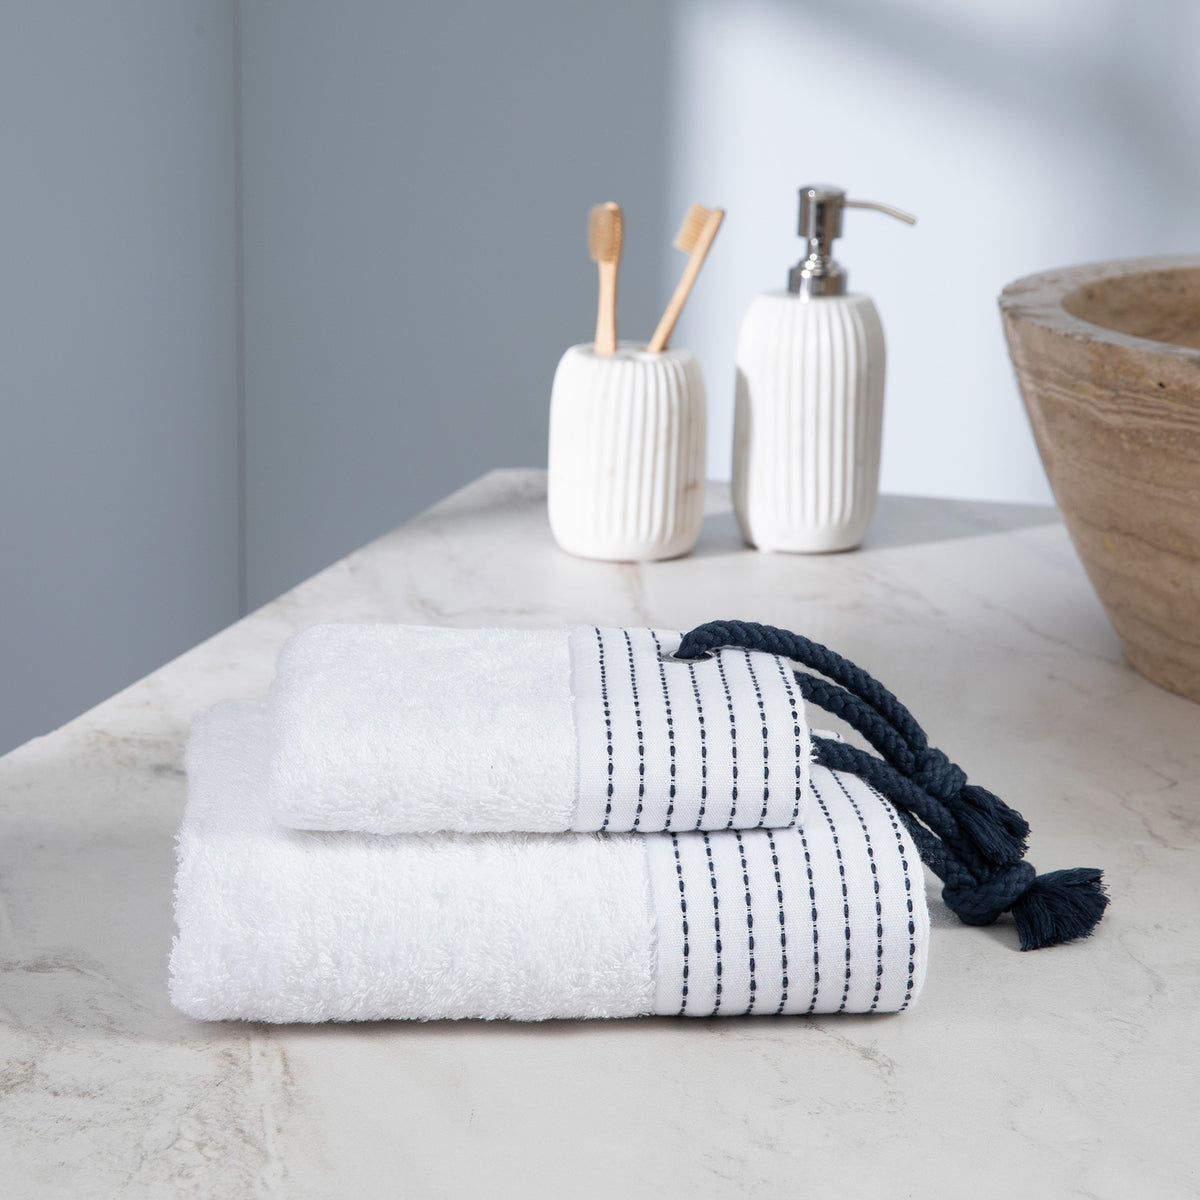 Turkish Terry Towel with Stylish Navy Rope as a loop, white, for Boat or Bath, ultra soft, very absorbent, easy to hang, Bamboo Combed Cotton